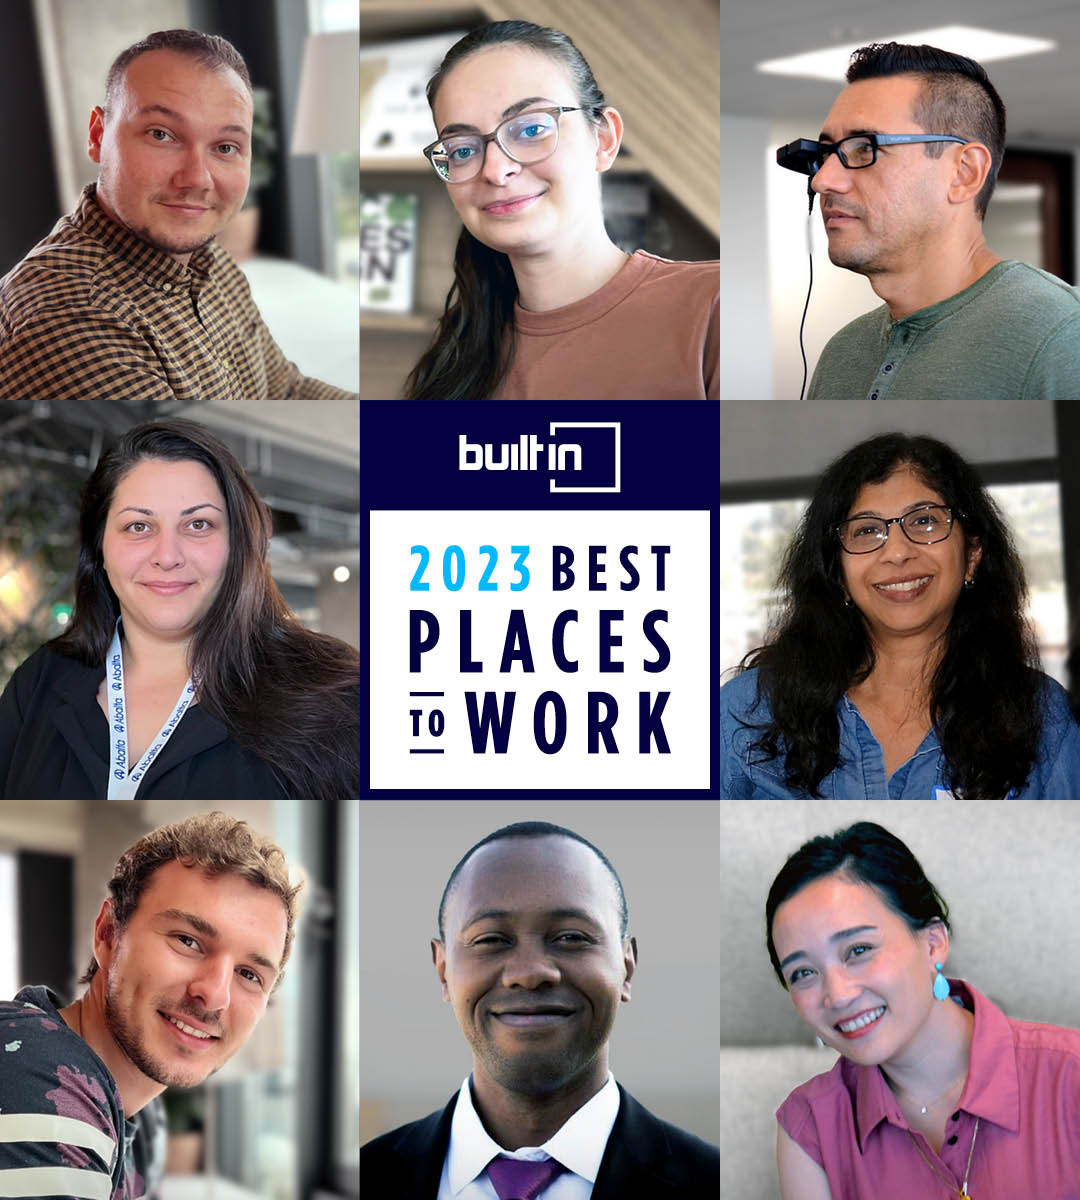 Abalta Technologies receives the Built In 2023 Best Places to Work Award!